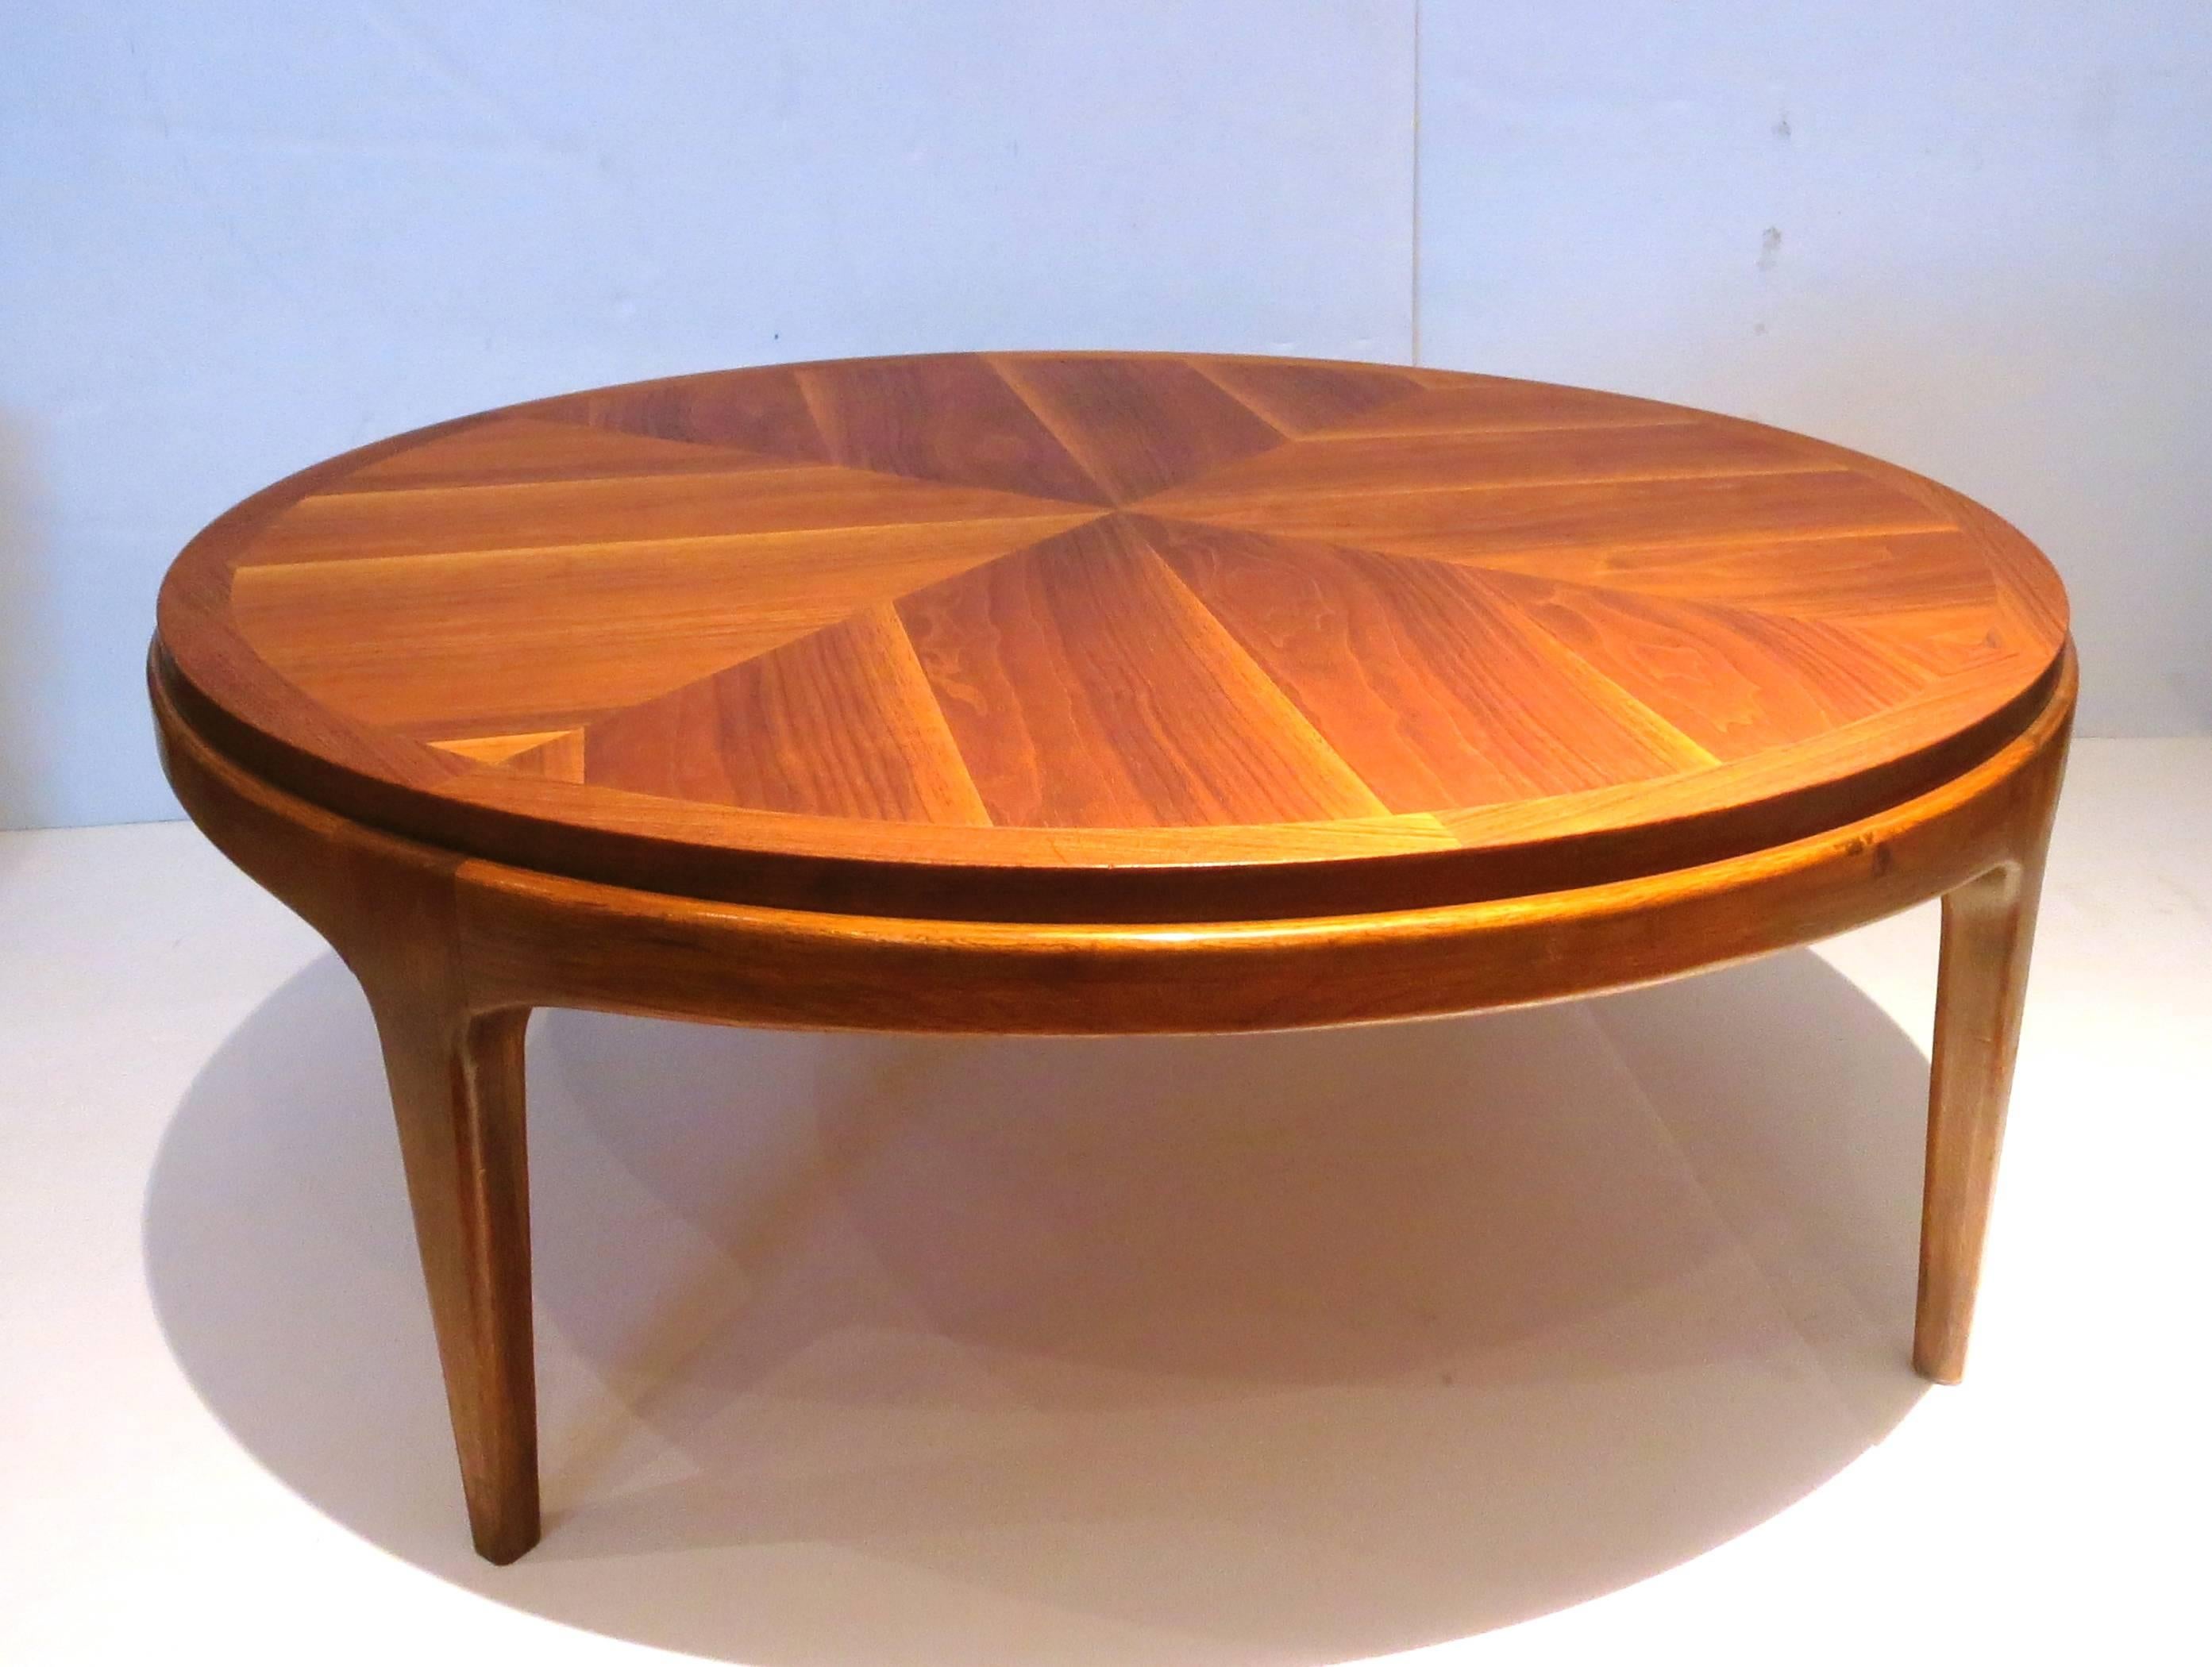 A beautiful walnut round coffee/cocktail table great shape and condition top has been refinished beautiful grain, in solid walnut base with four legs solid and sturdy.